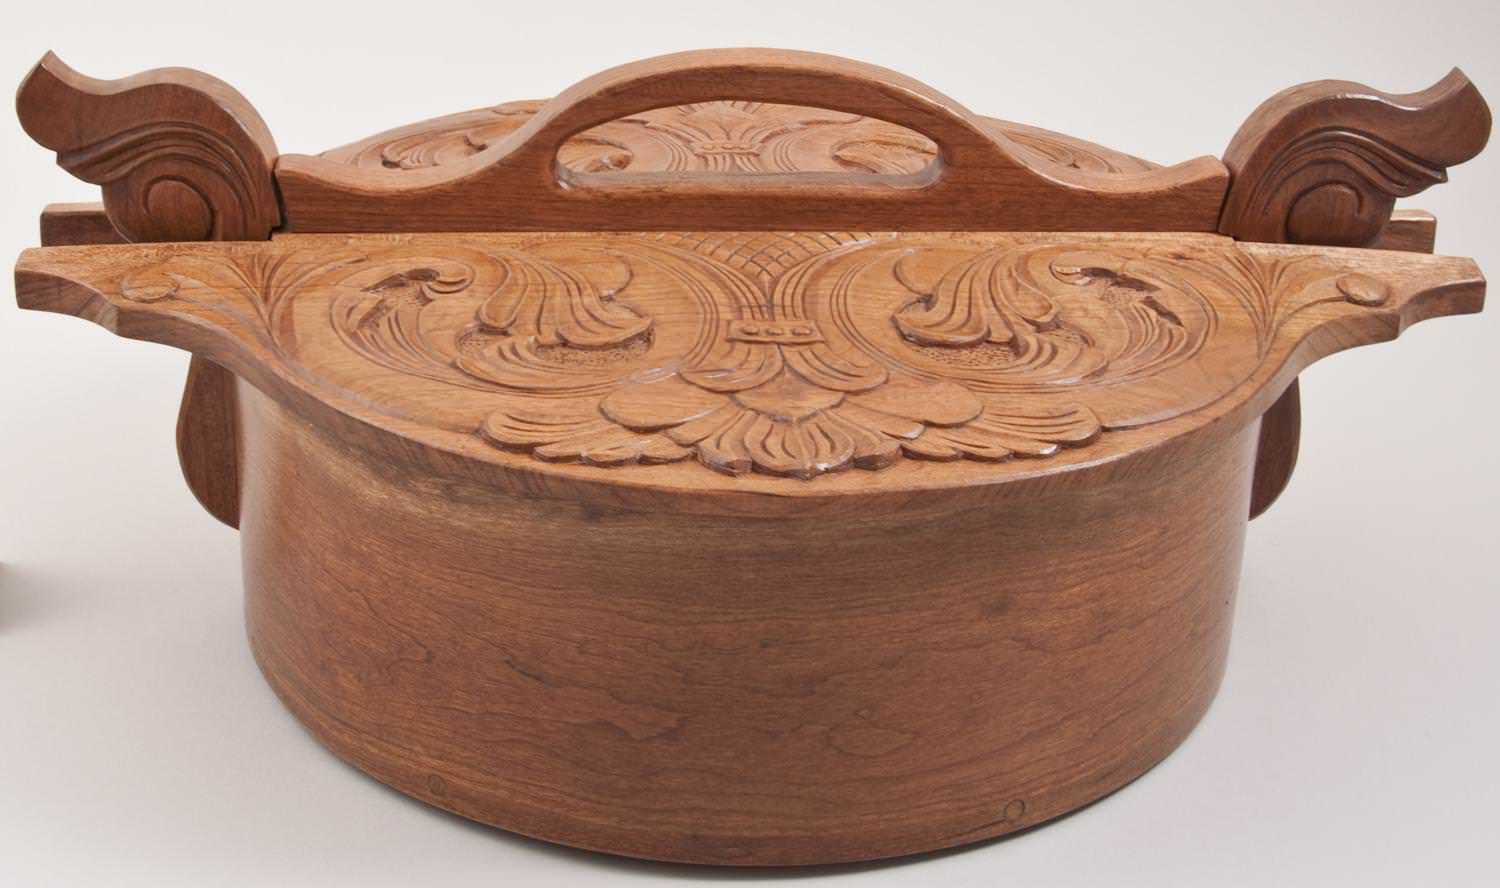 Acanthus-carved oval box (tine) © 2010 Russ Biros Acanthus-carved oval box (tine) © 2010 Russ Biros